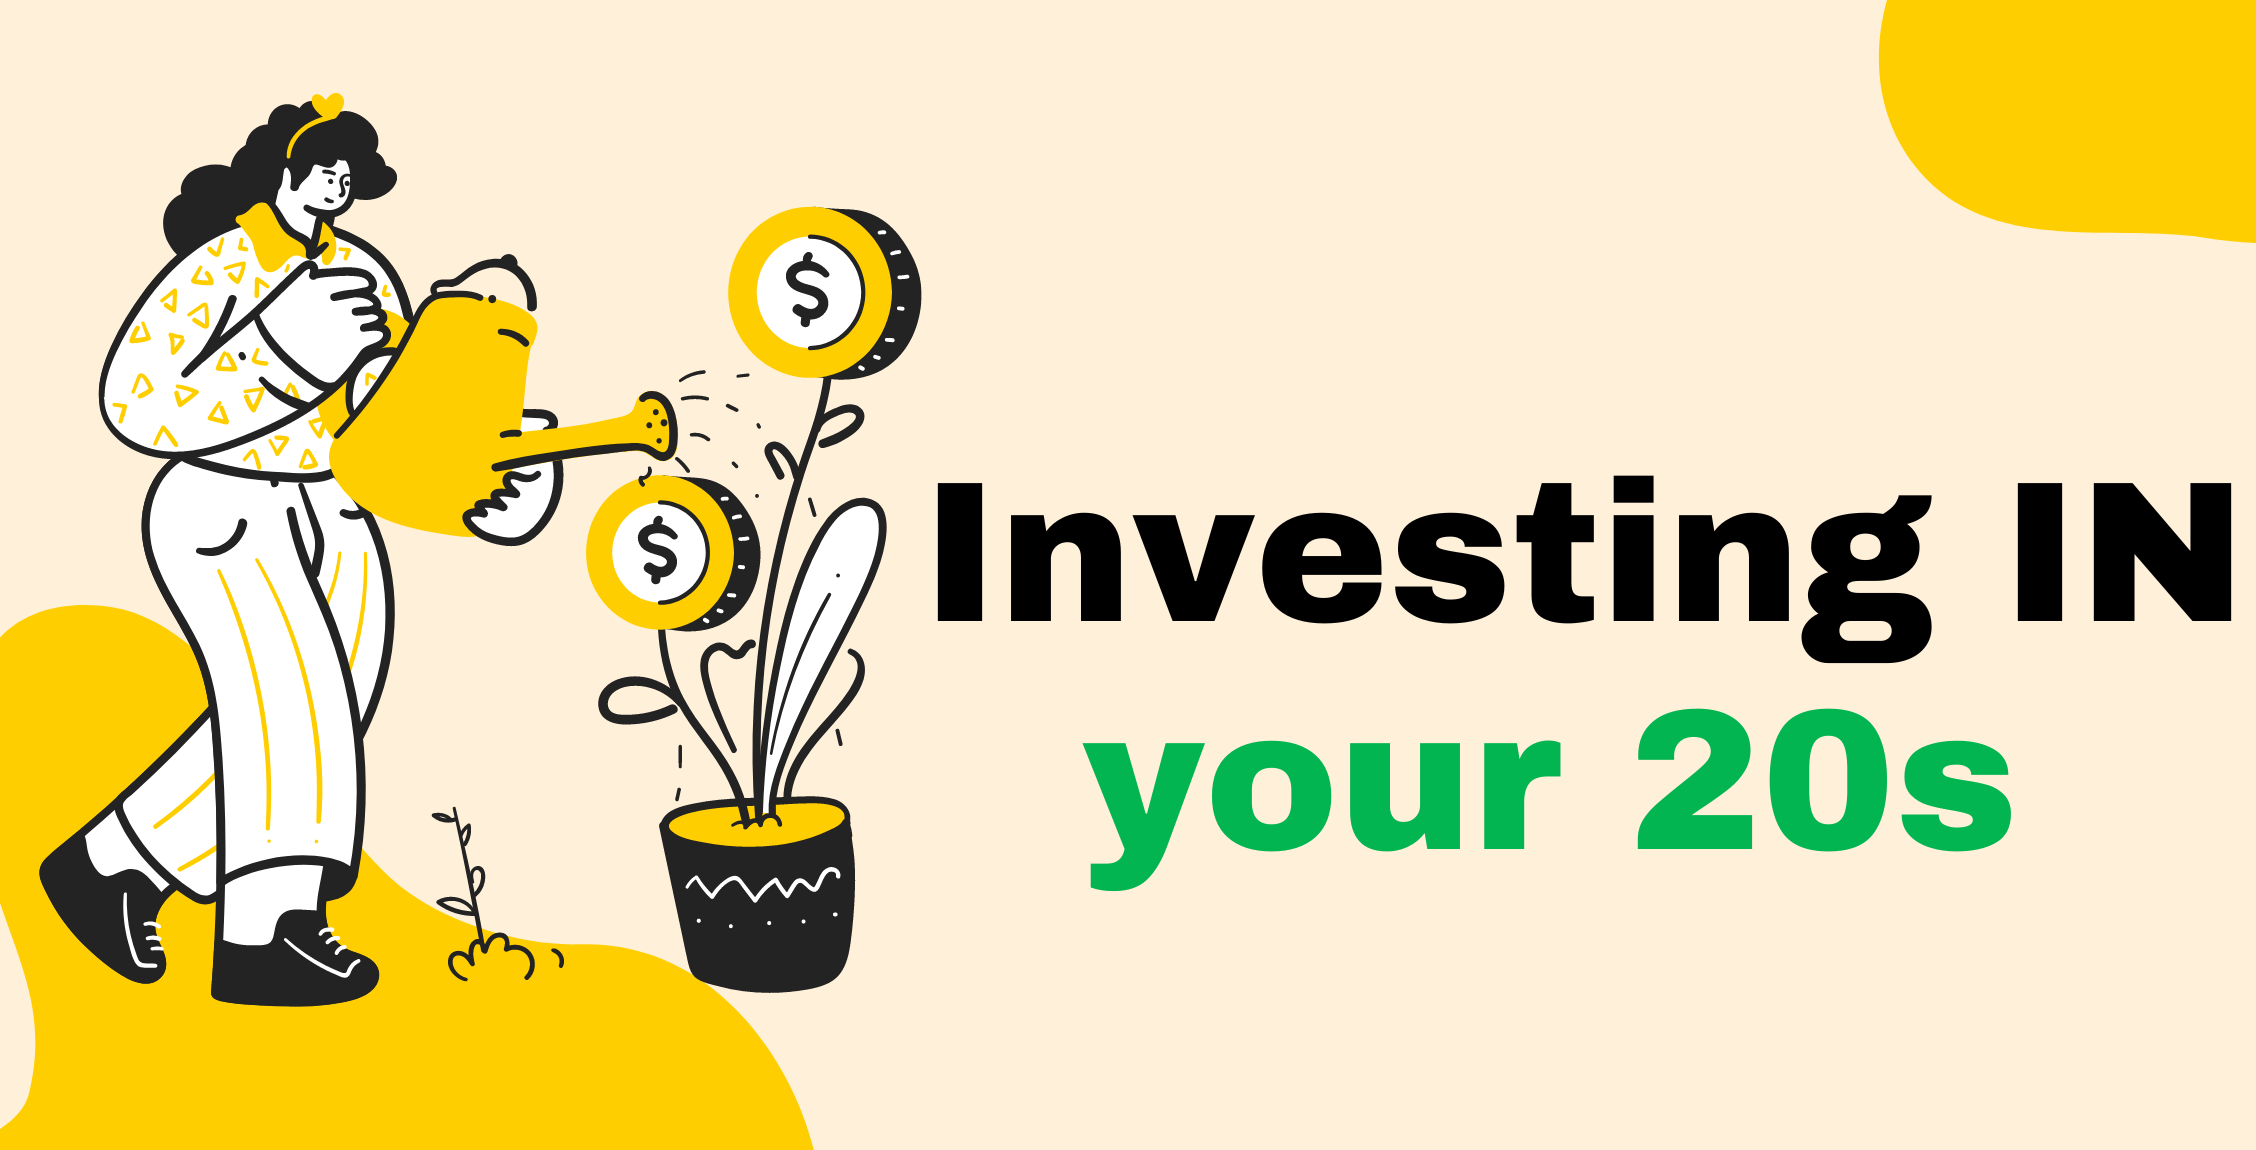 Investment IN your 20s